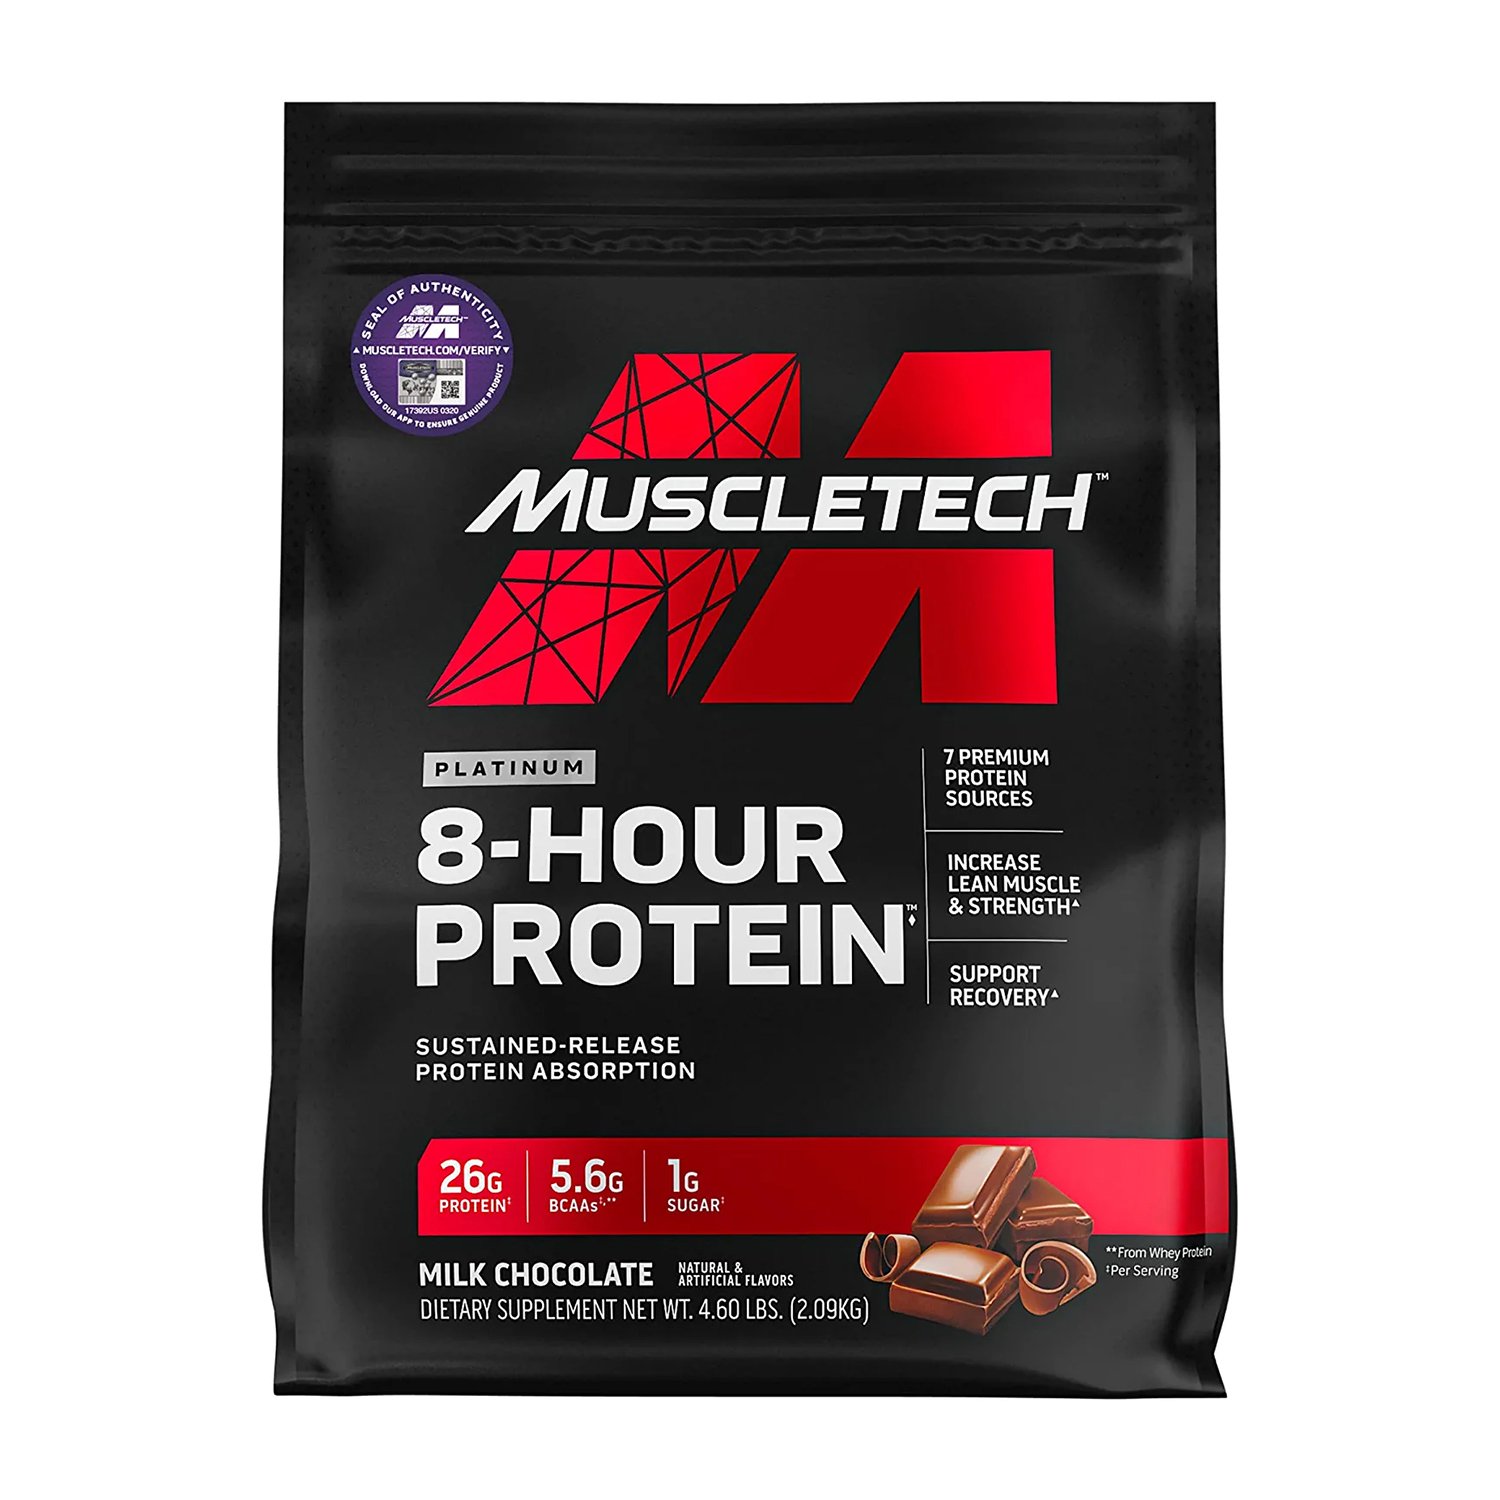 MUSCLETECH PLATINUM 8-HOUR Protein 4.58 Lbs